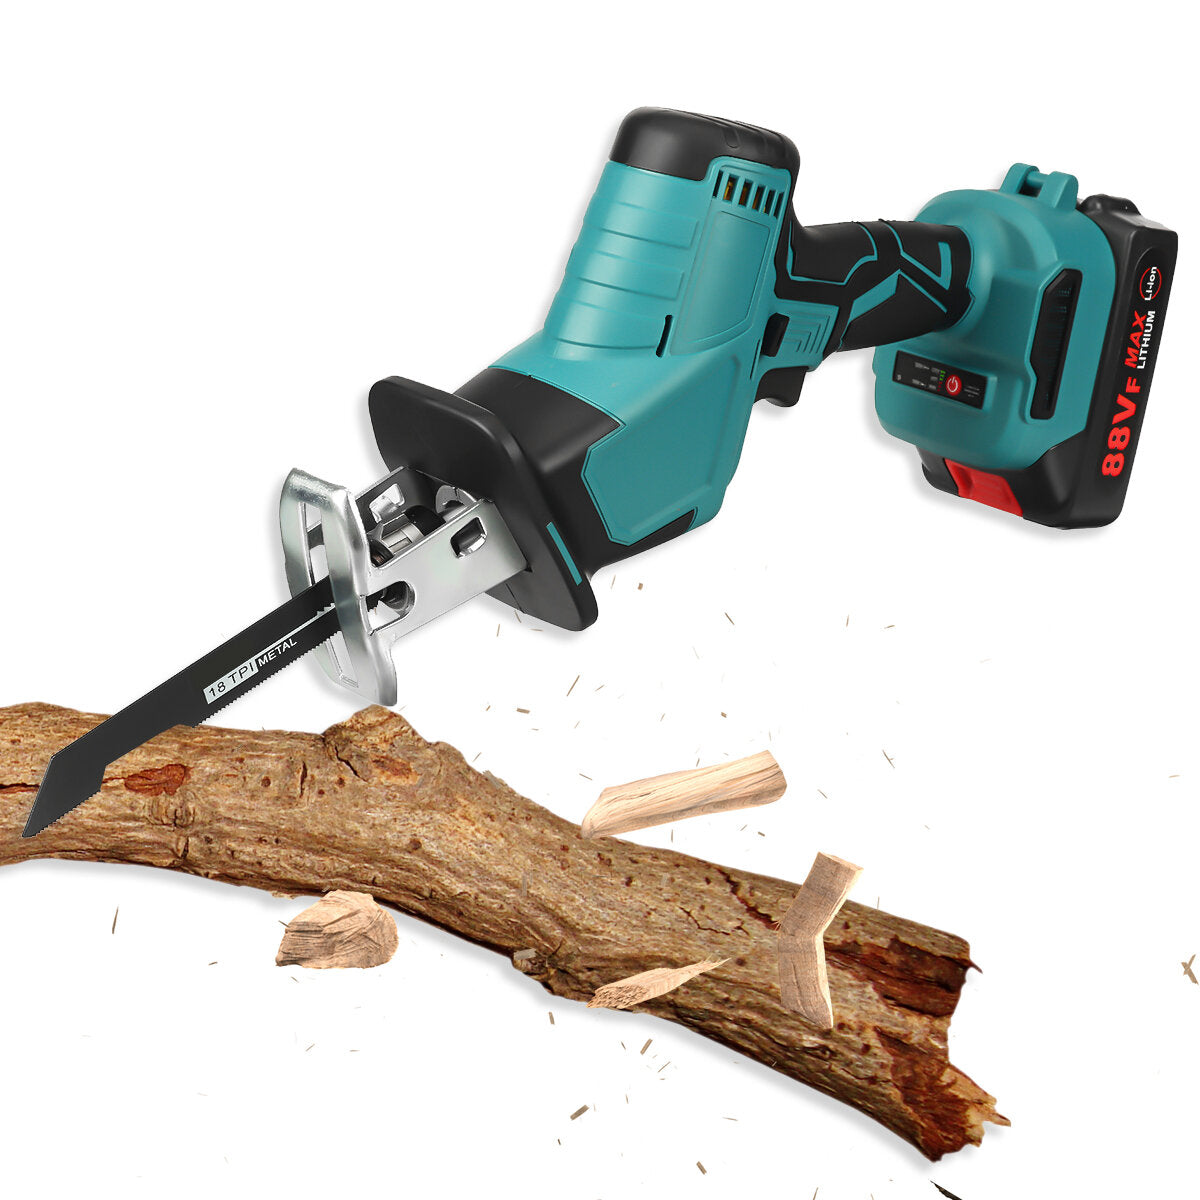 88VF 15mm 3000rpm Portable Electric Cordless Reciprocating Saw Rechargeable Woodworking Power Tools